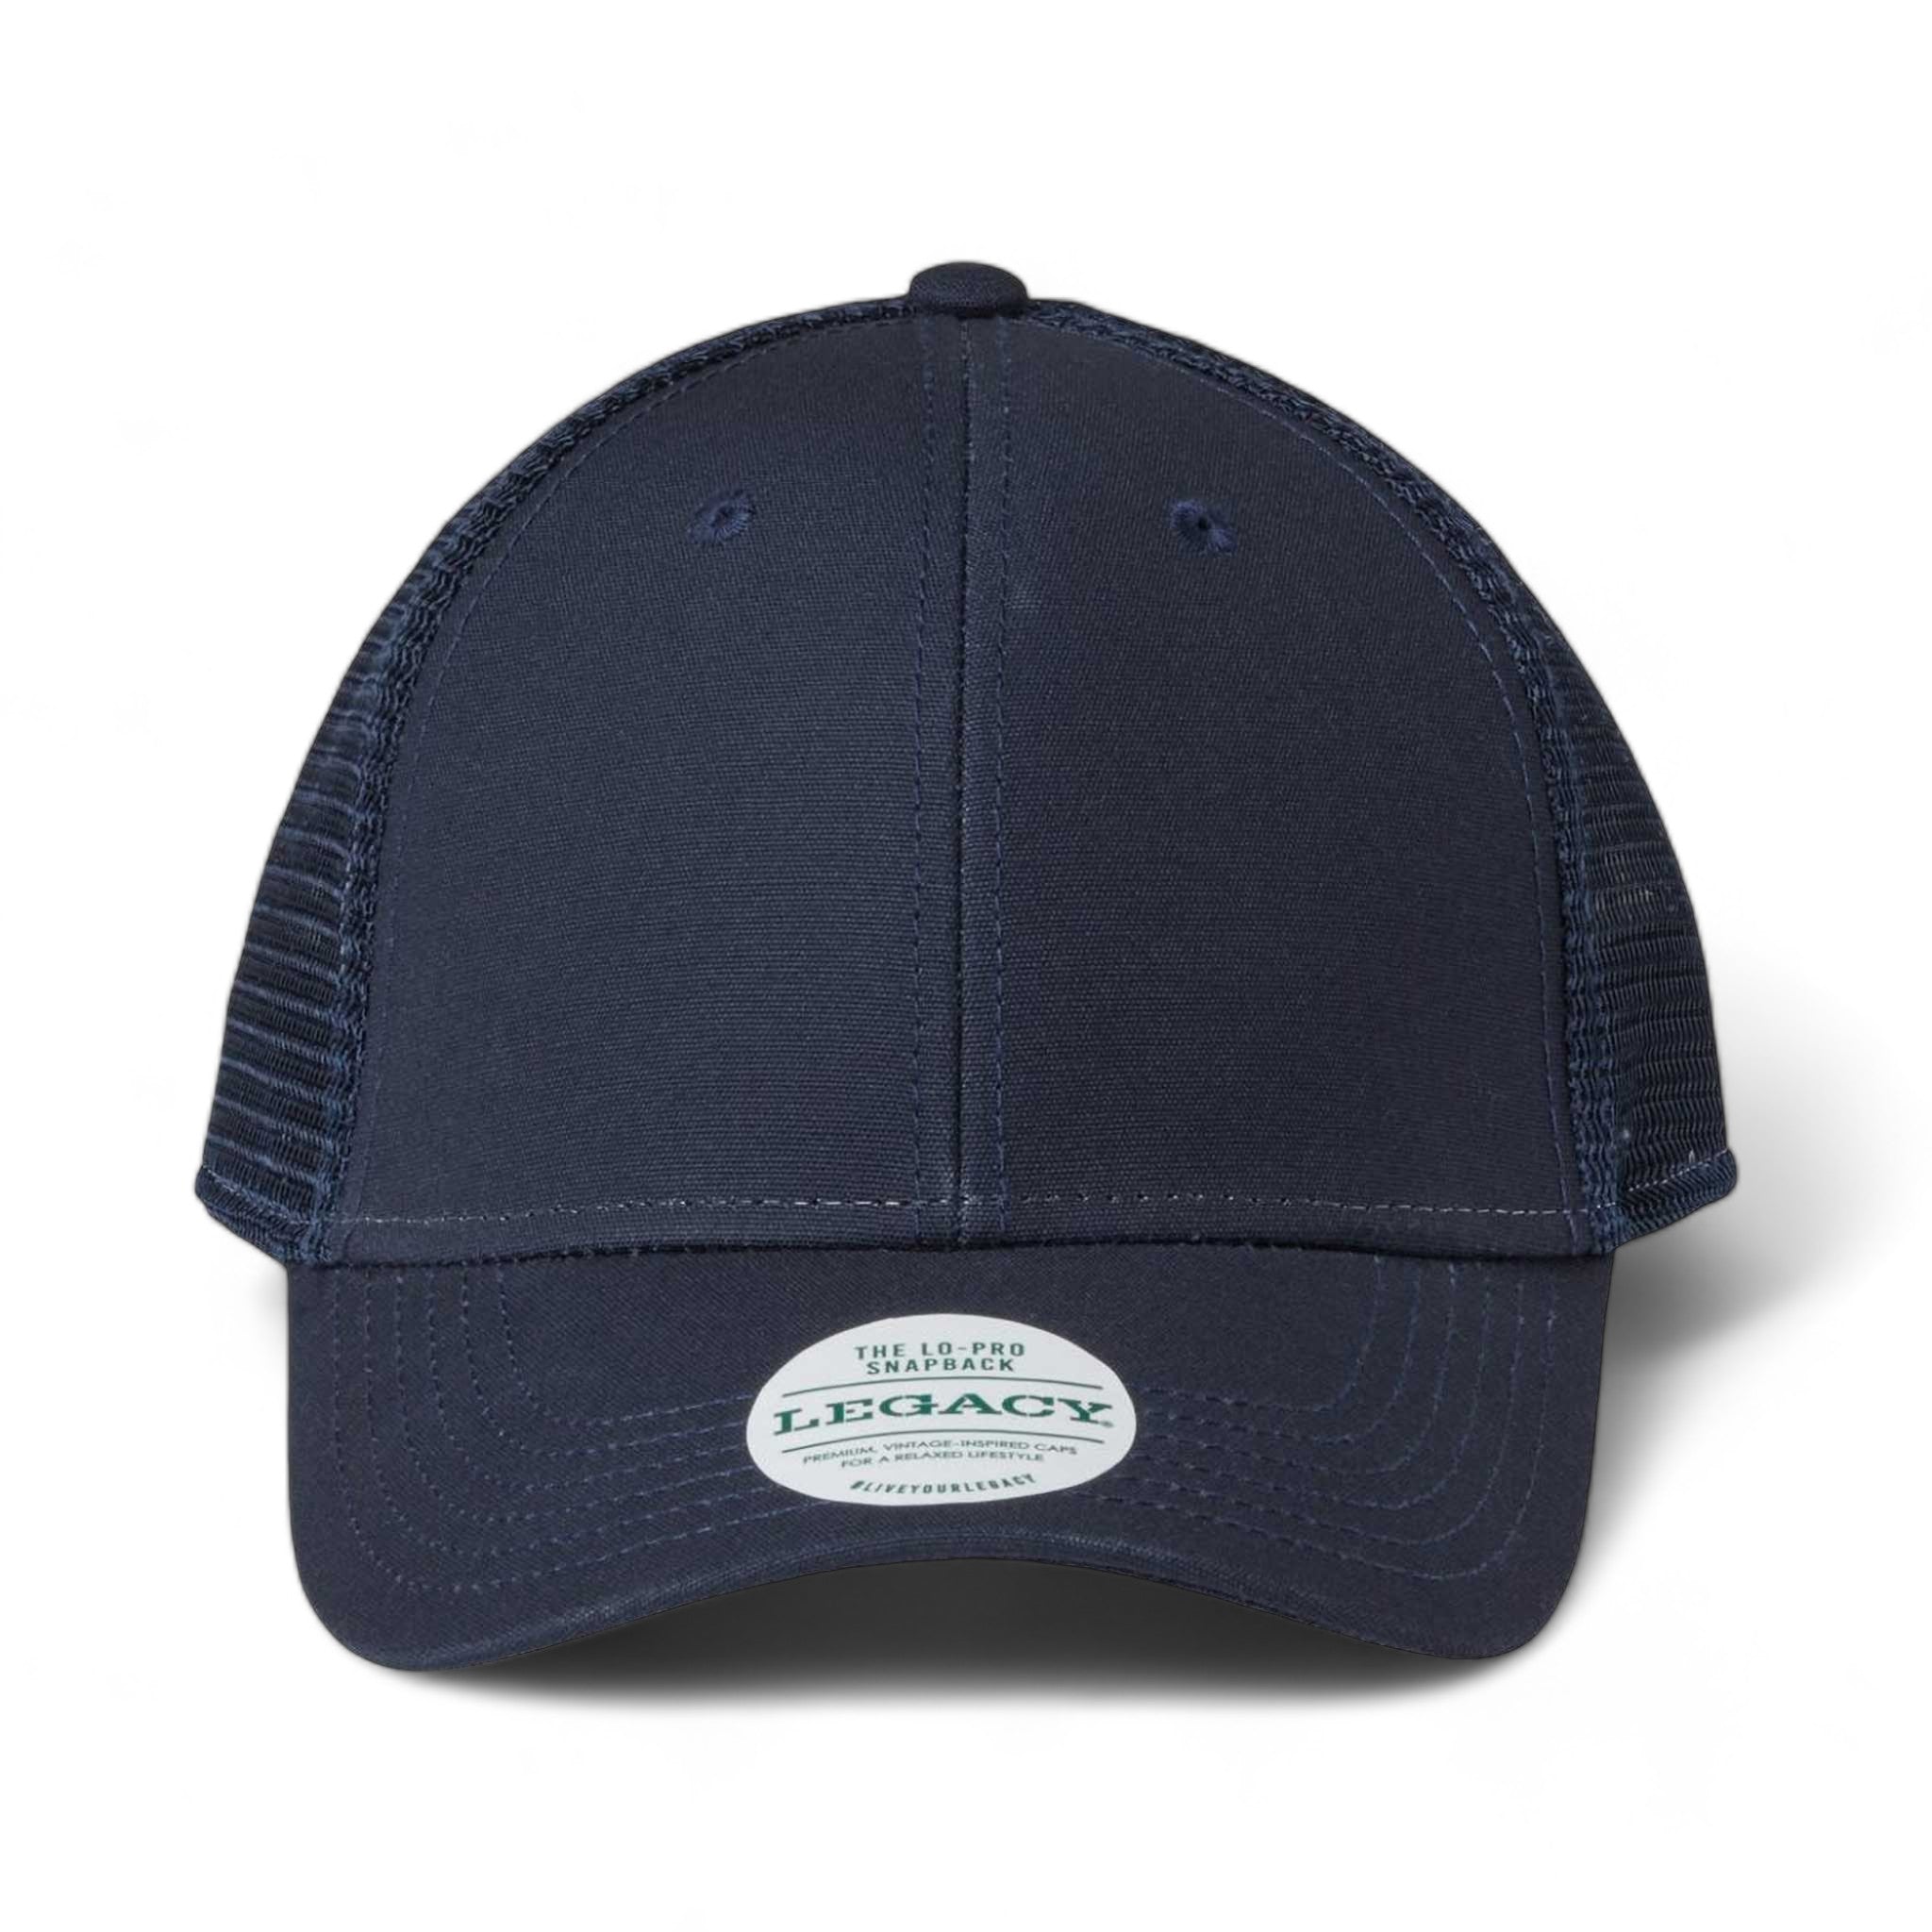 Front view of LEGACY LPS custom hat in navy and navy